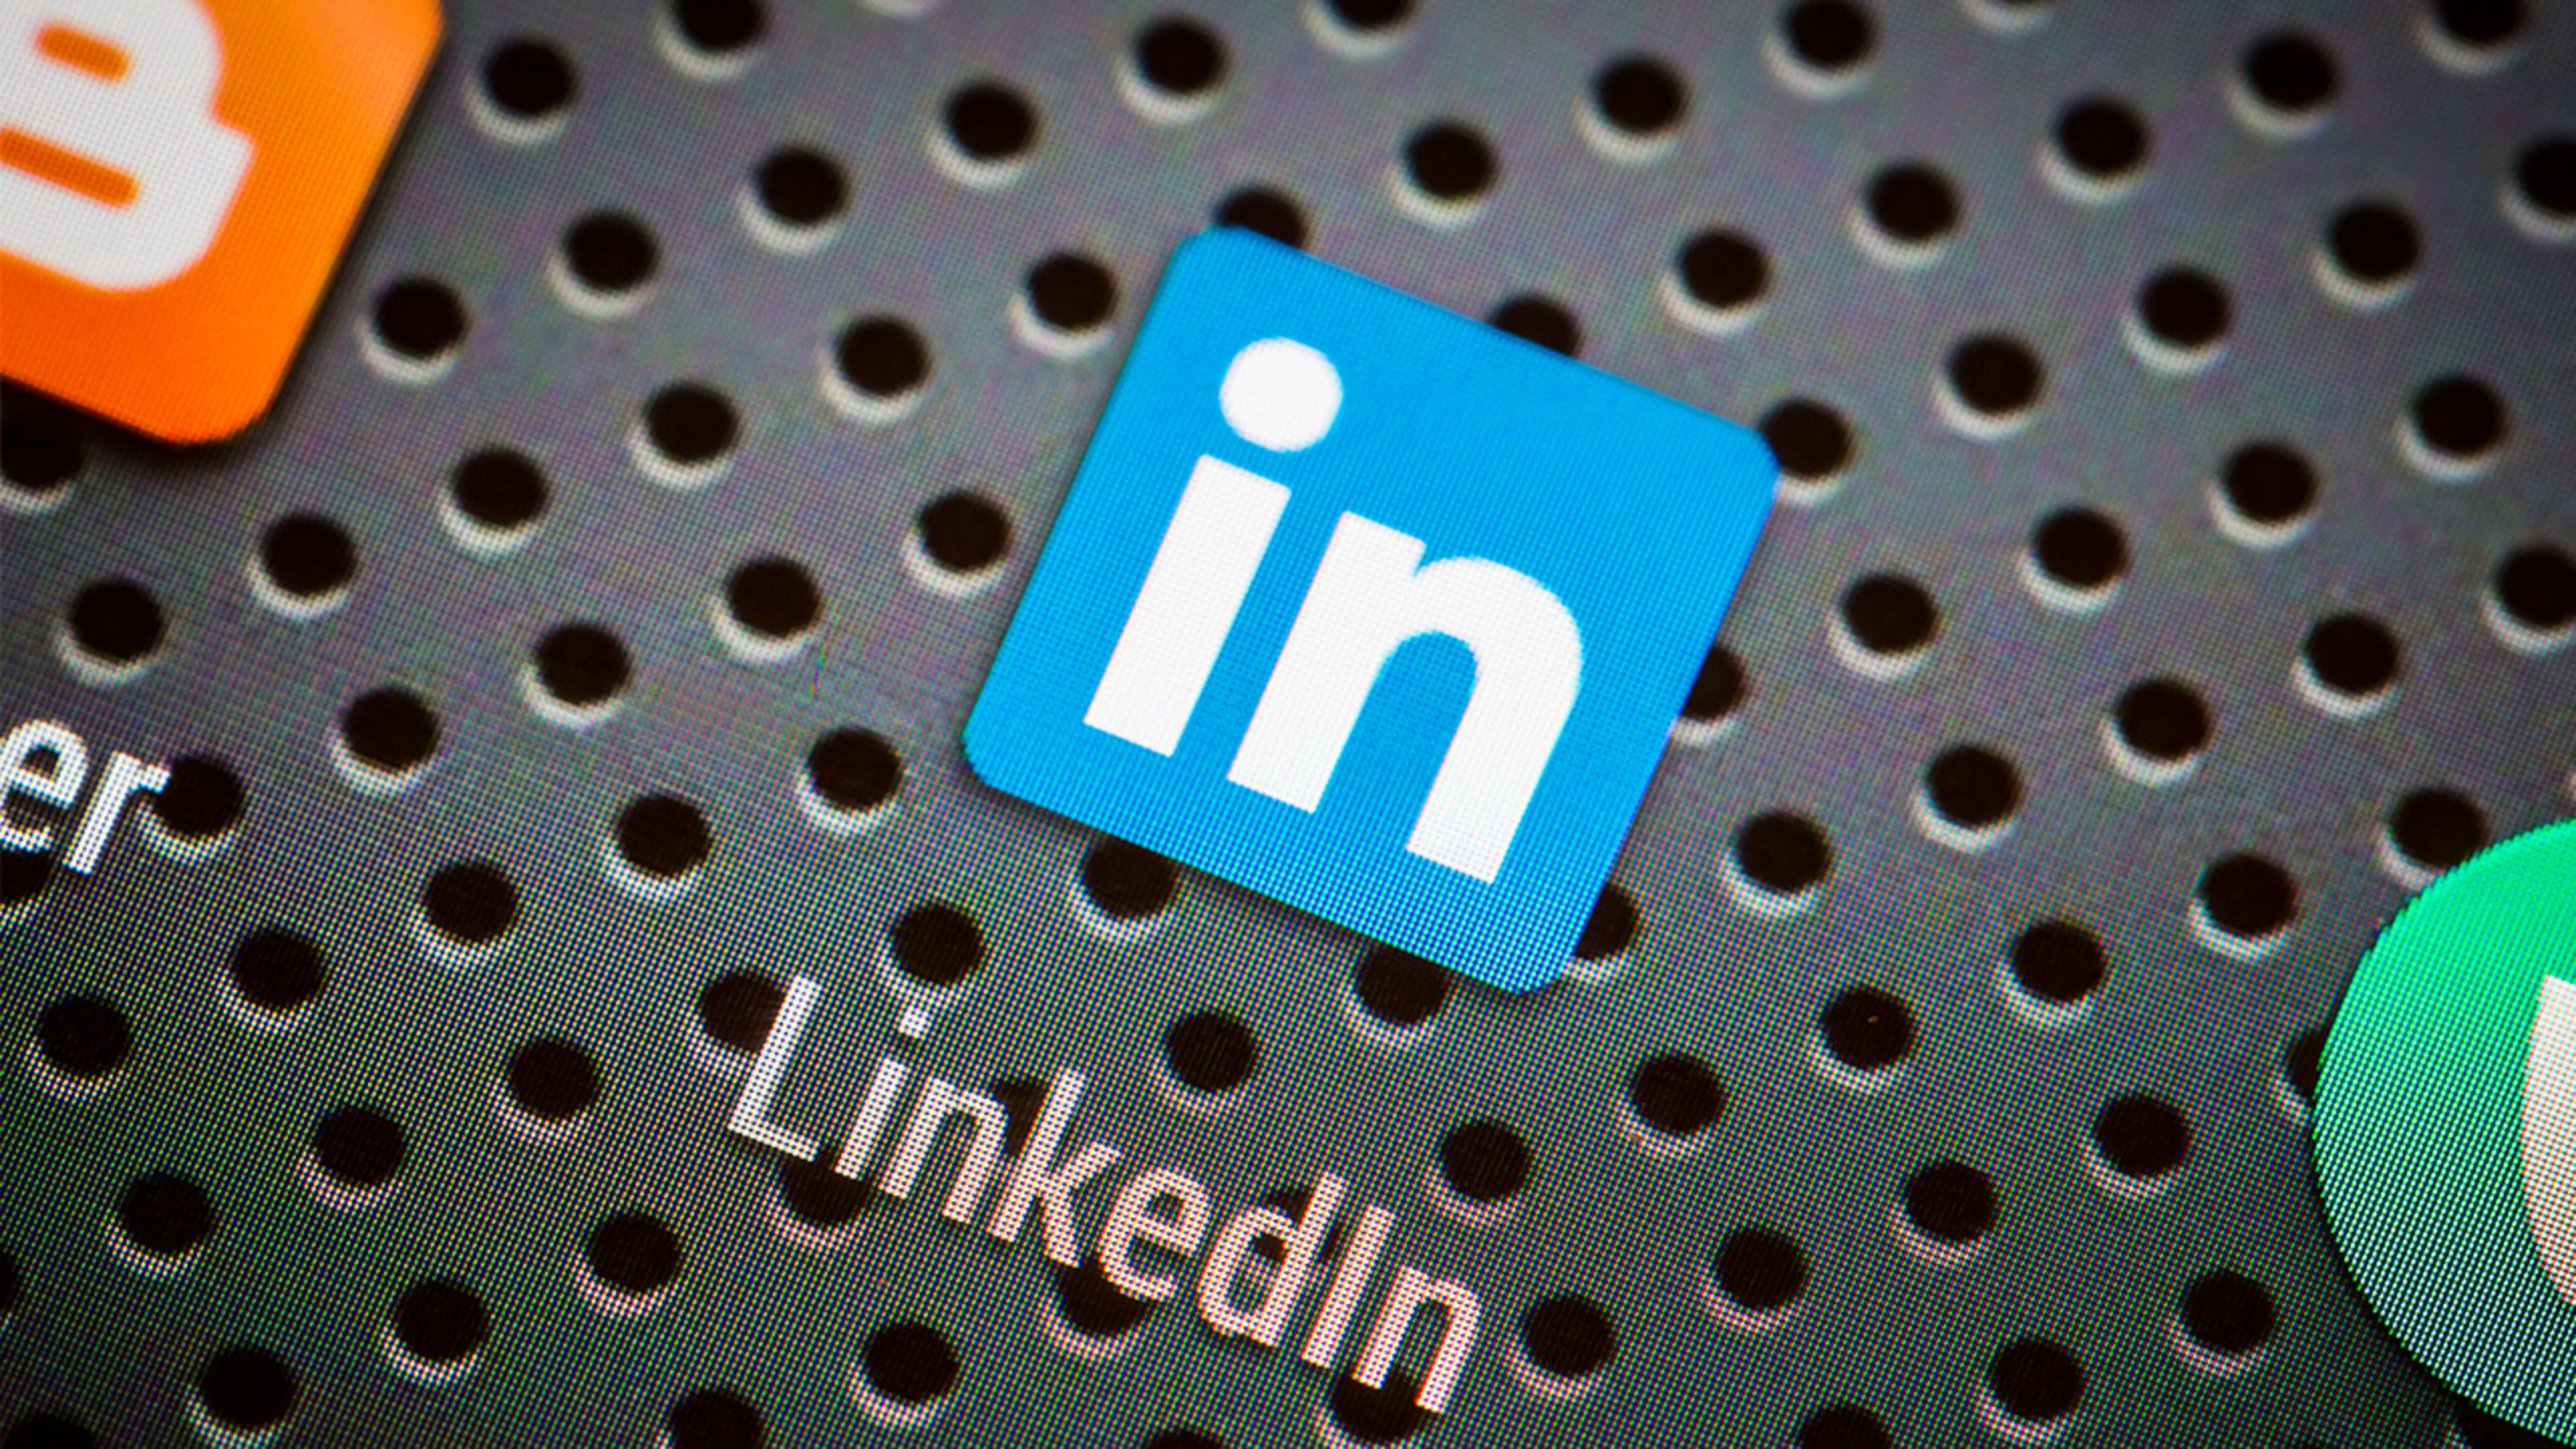 The 10 Words You Should Never Use In Your LinkedIn Profile - Fast Company